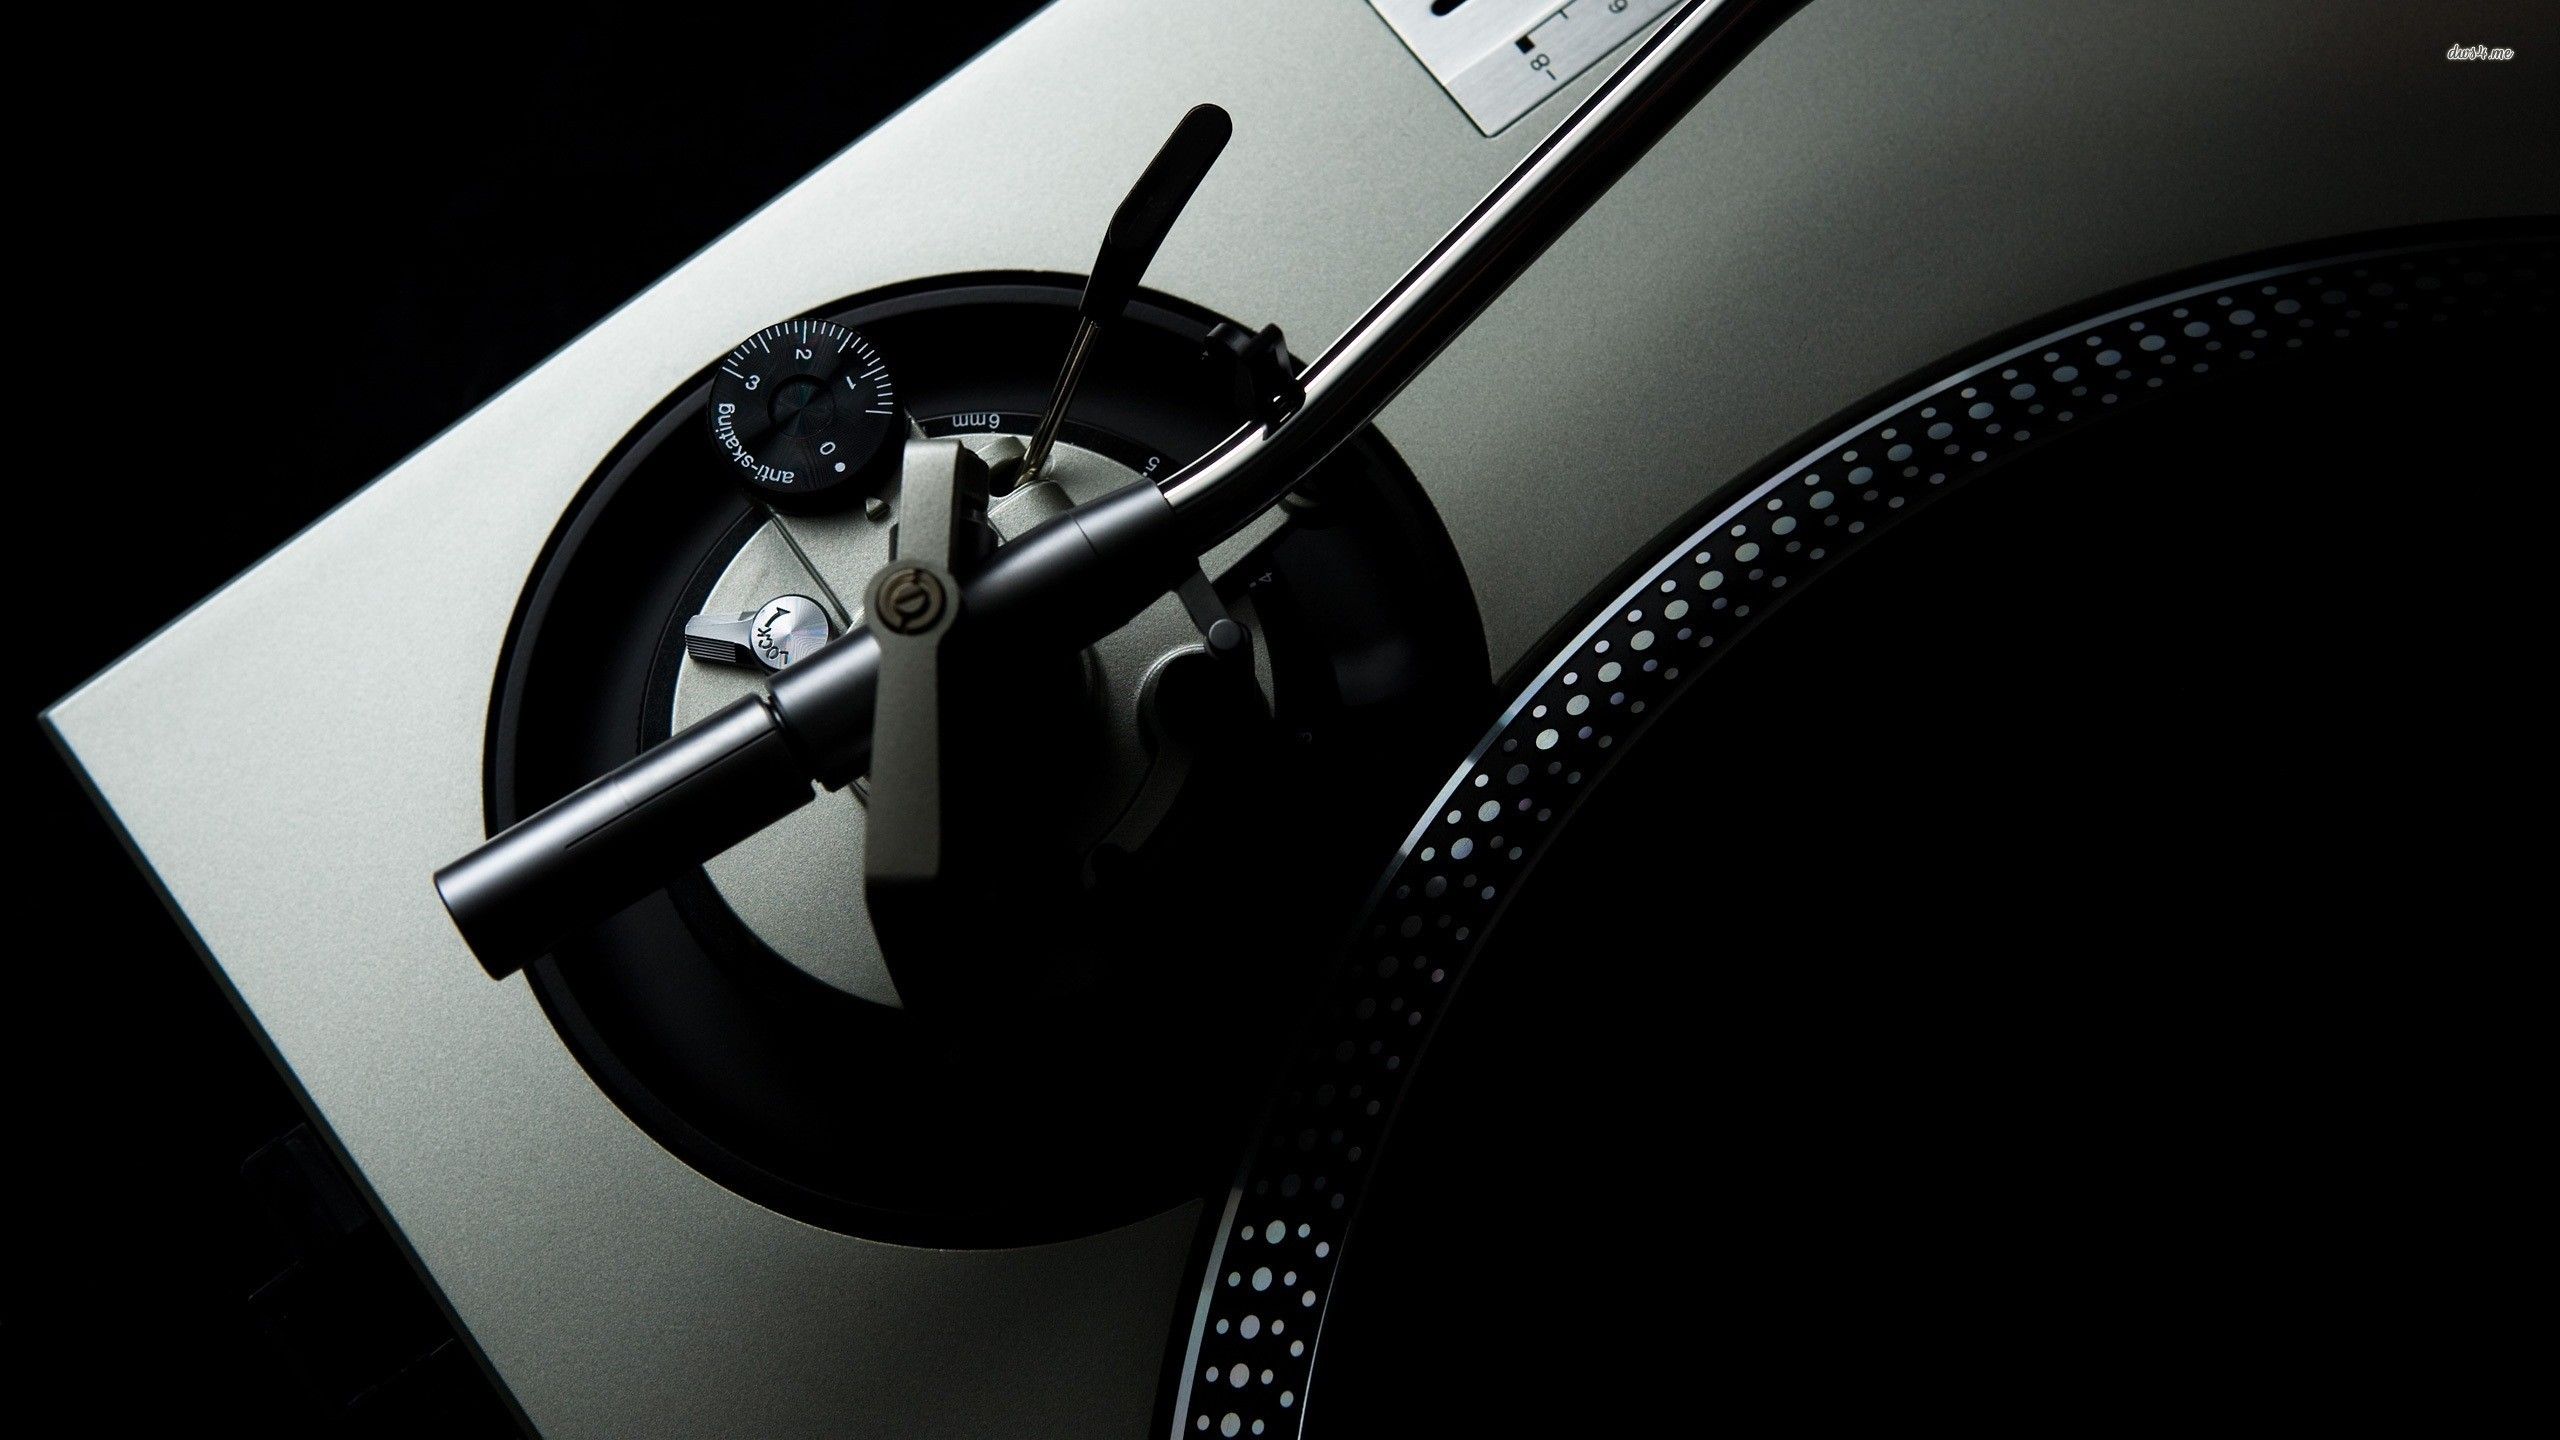 Turntable wallpaper - Music wallpapers - #15099